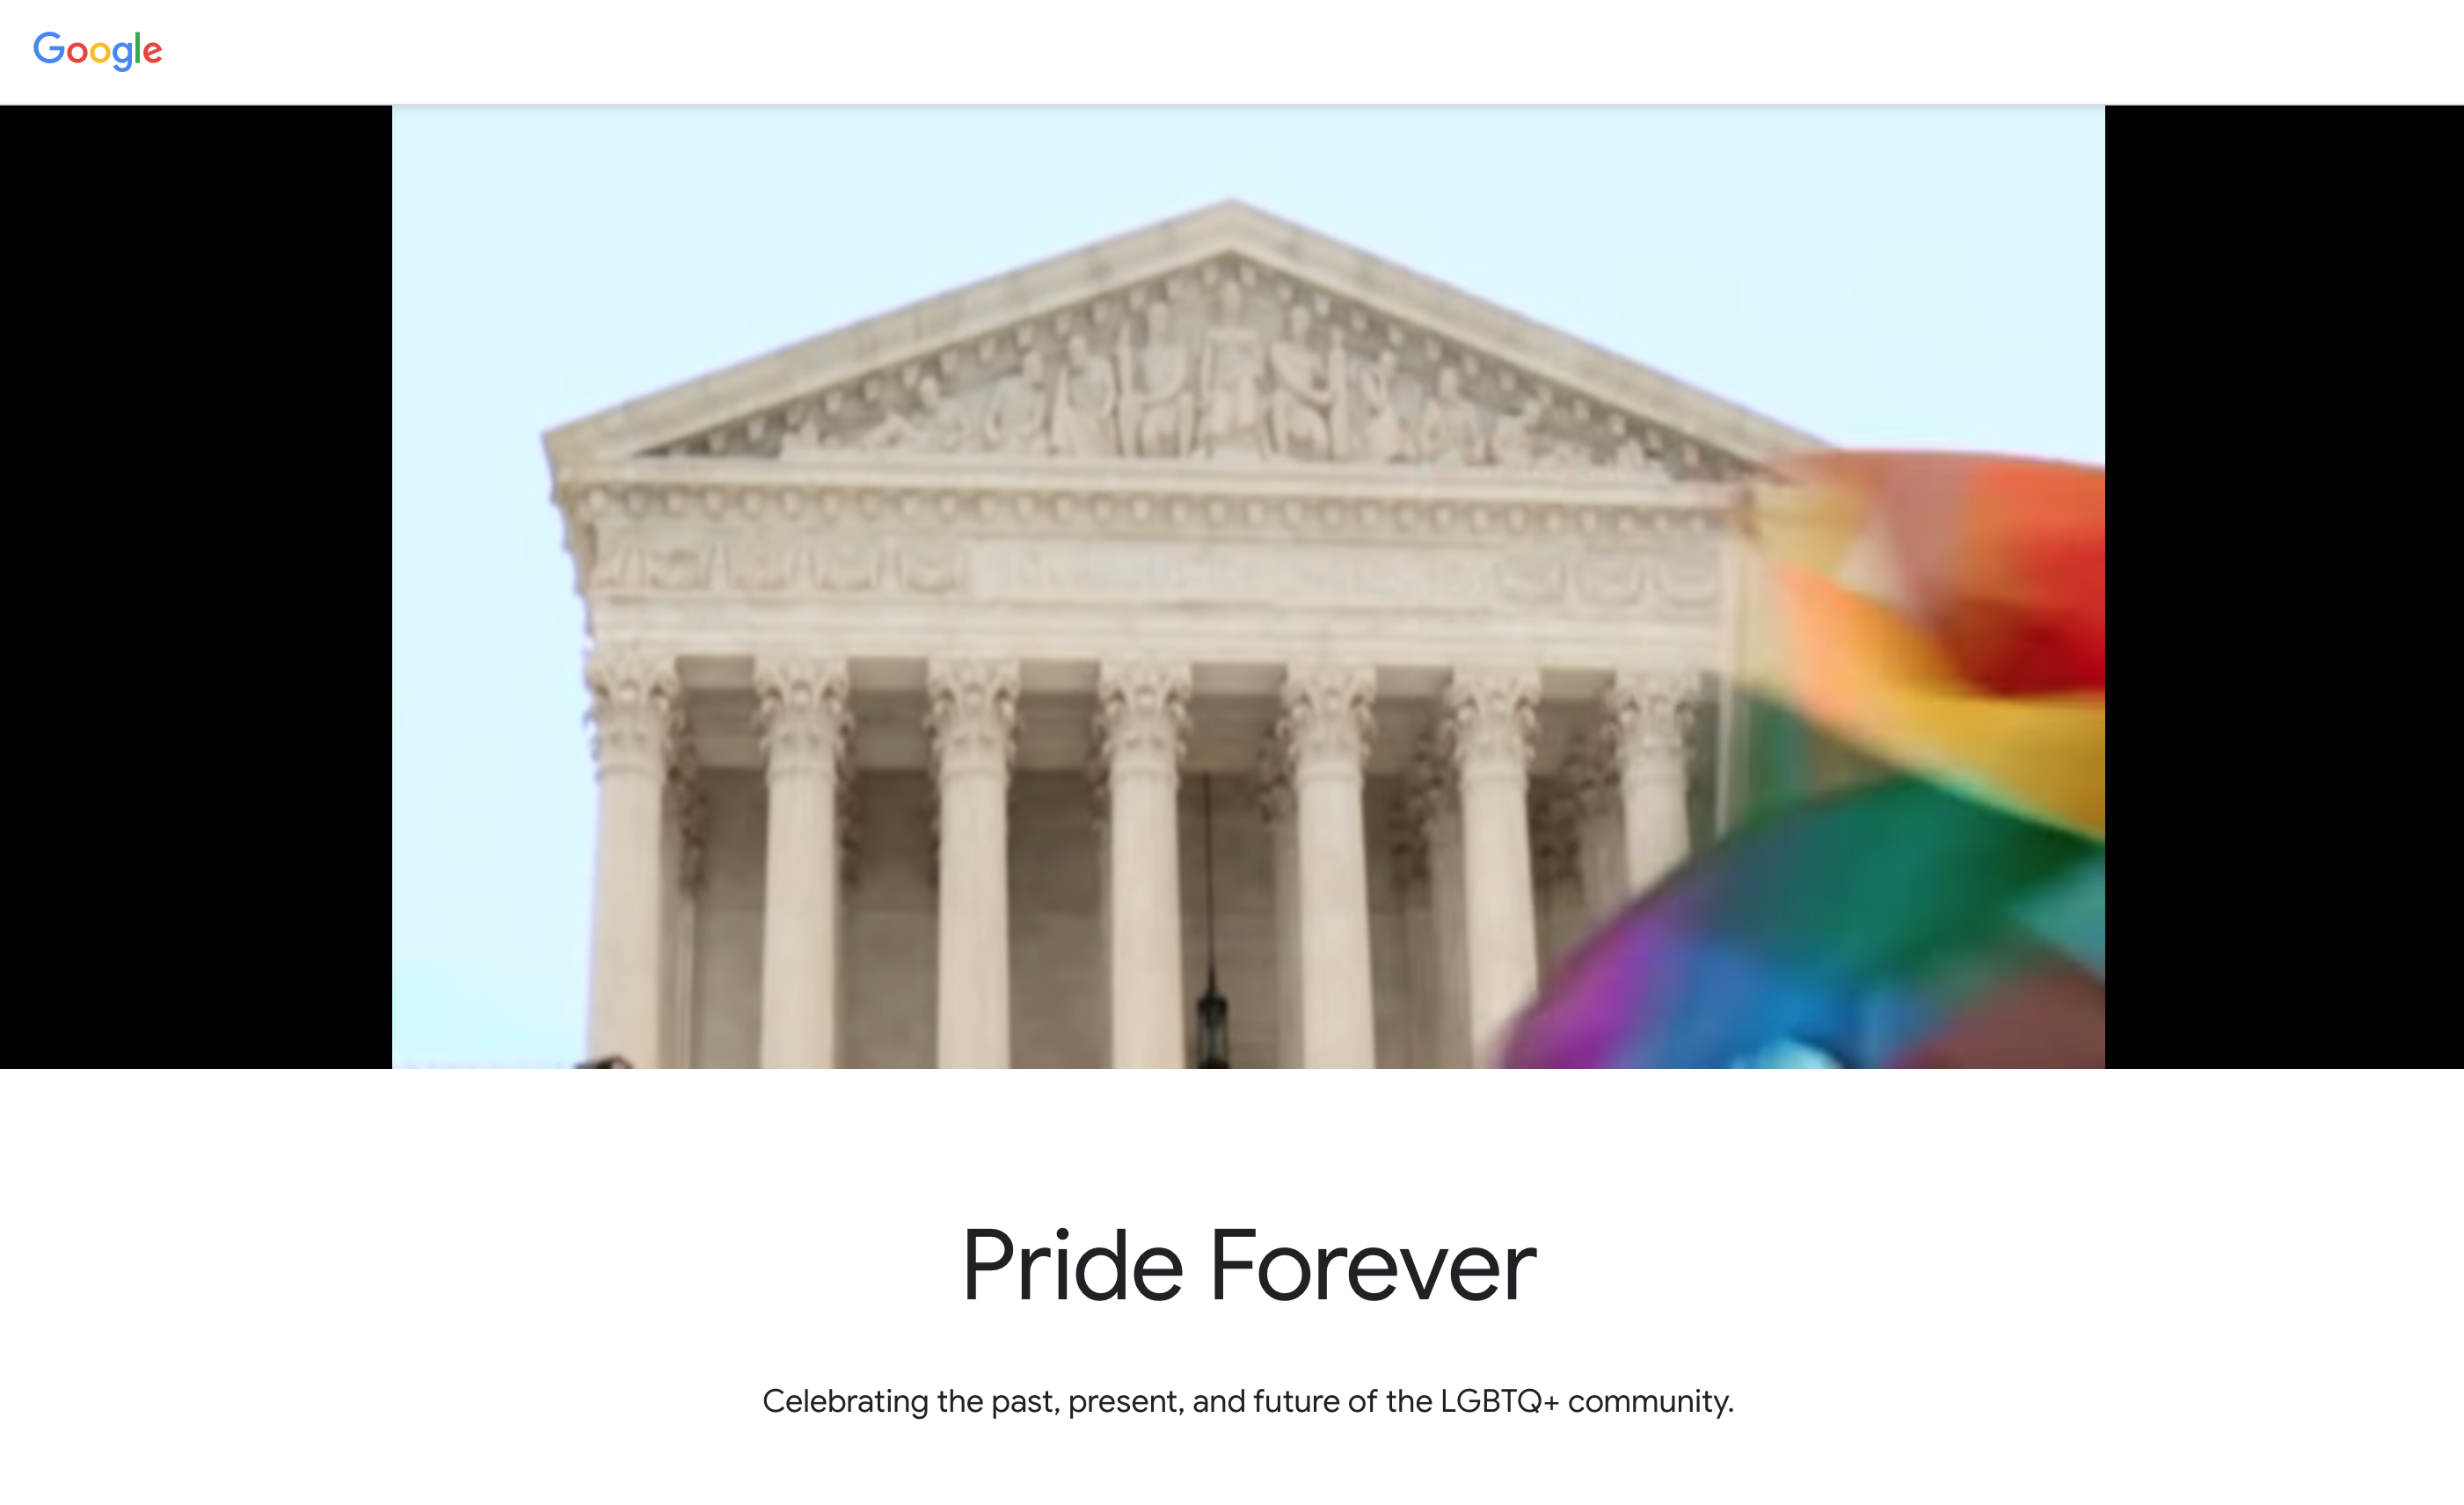 Google’s site for supporting the LGBTQ+ community